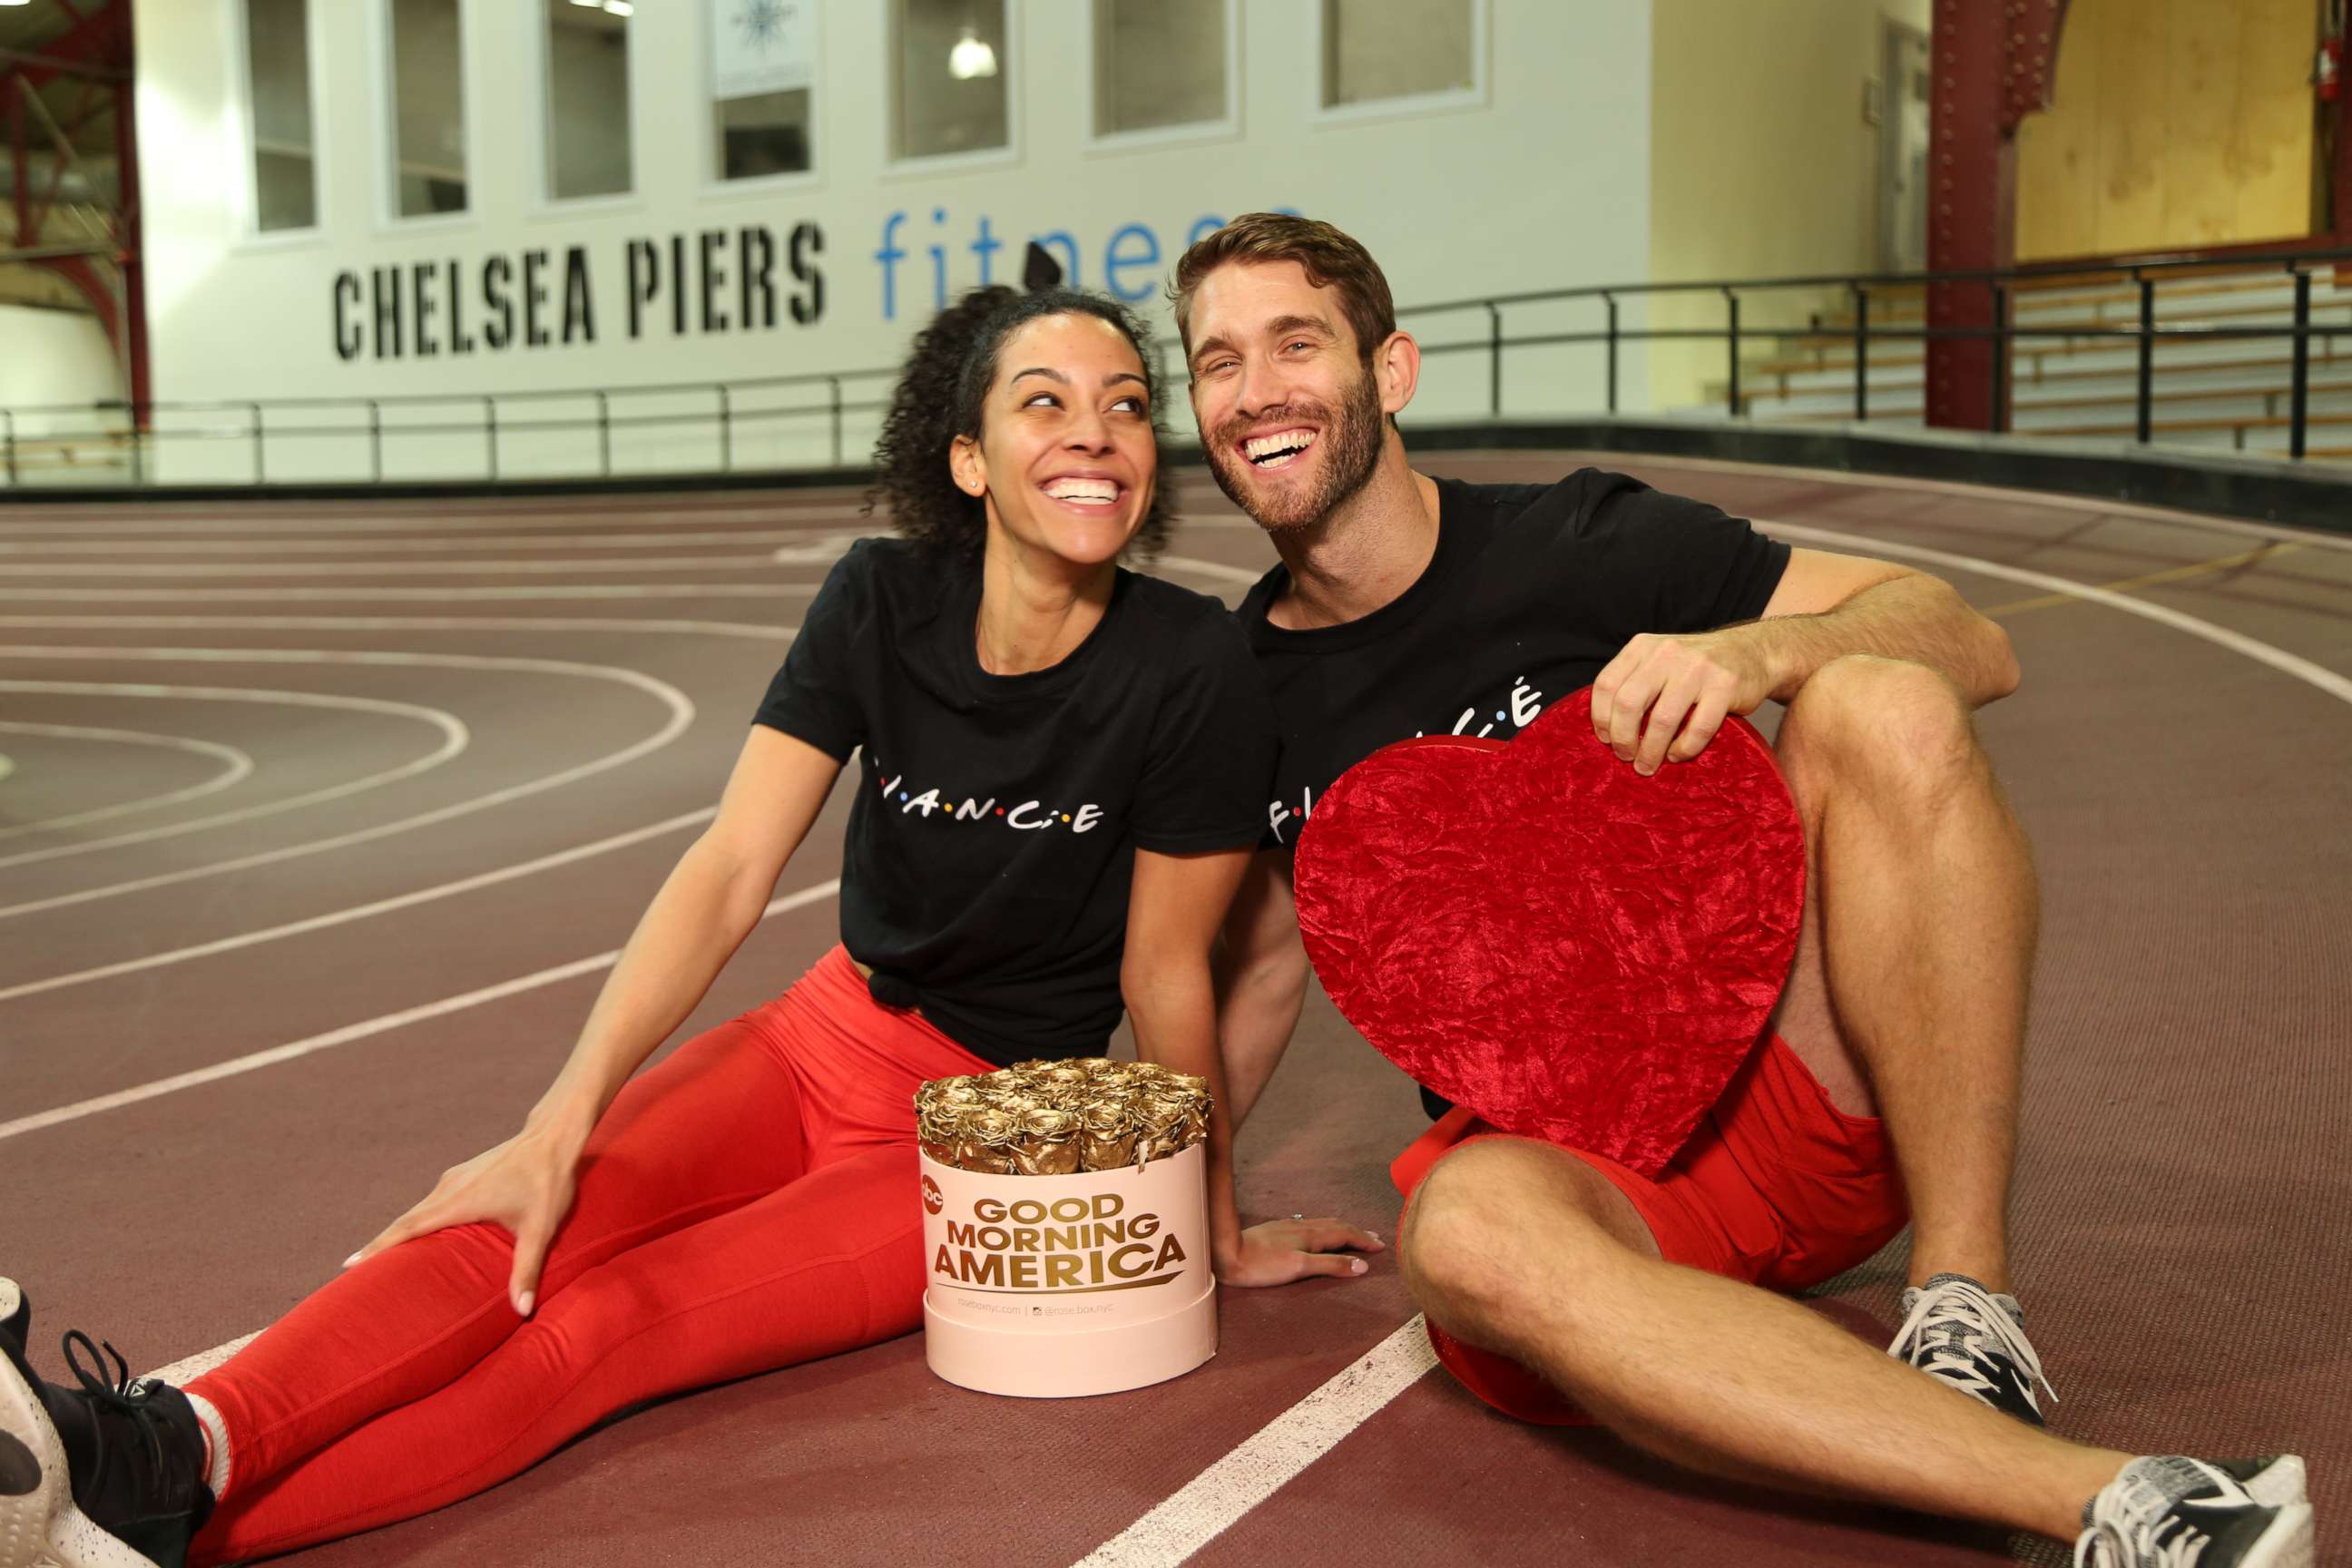 PHOTO: Engaged trainers Bree Branker and CJ Koegel demonstrate a couples workout at Chelsea Piers in New York City.